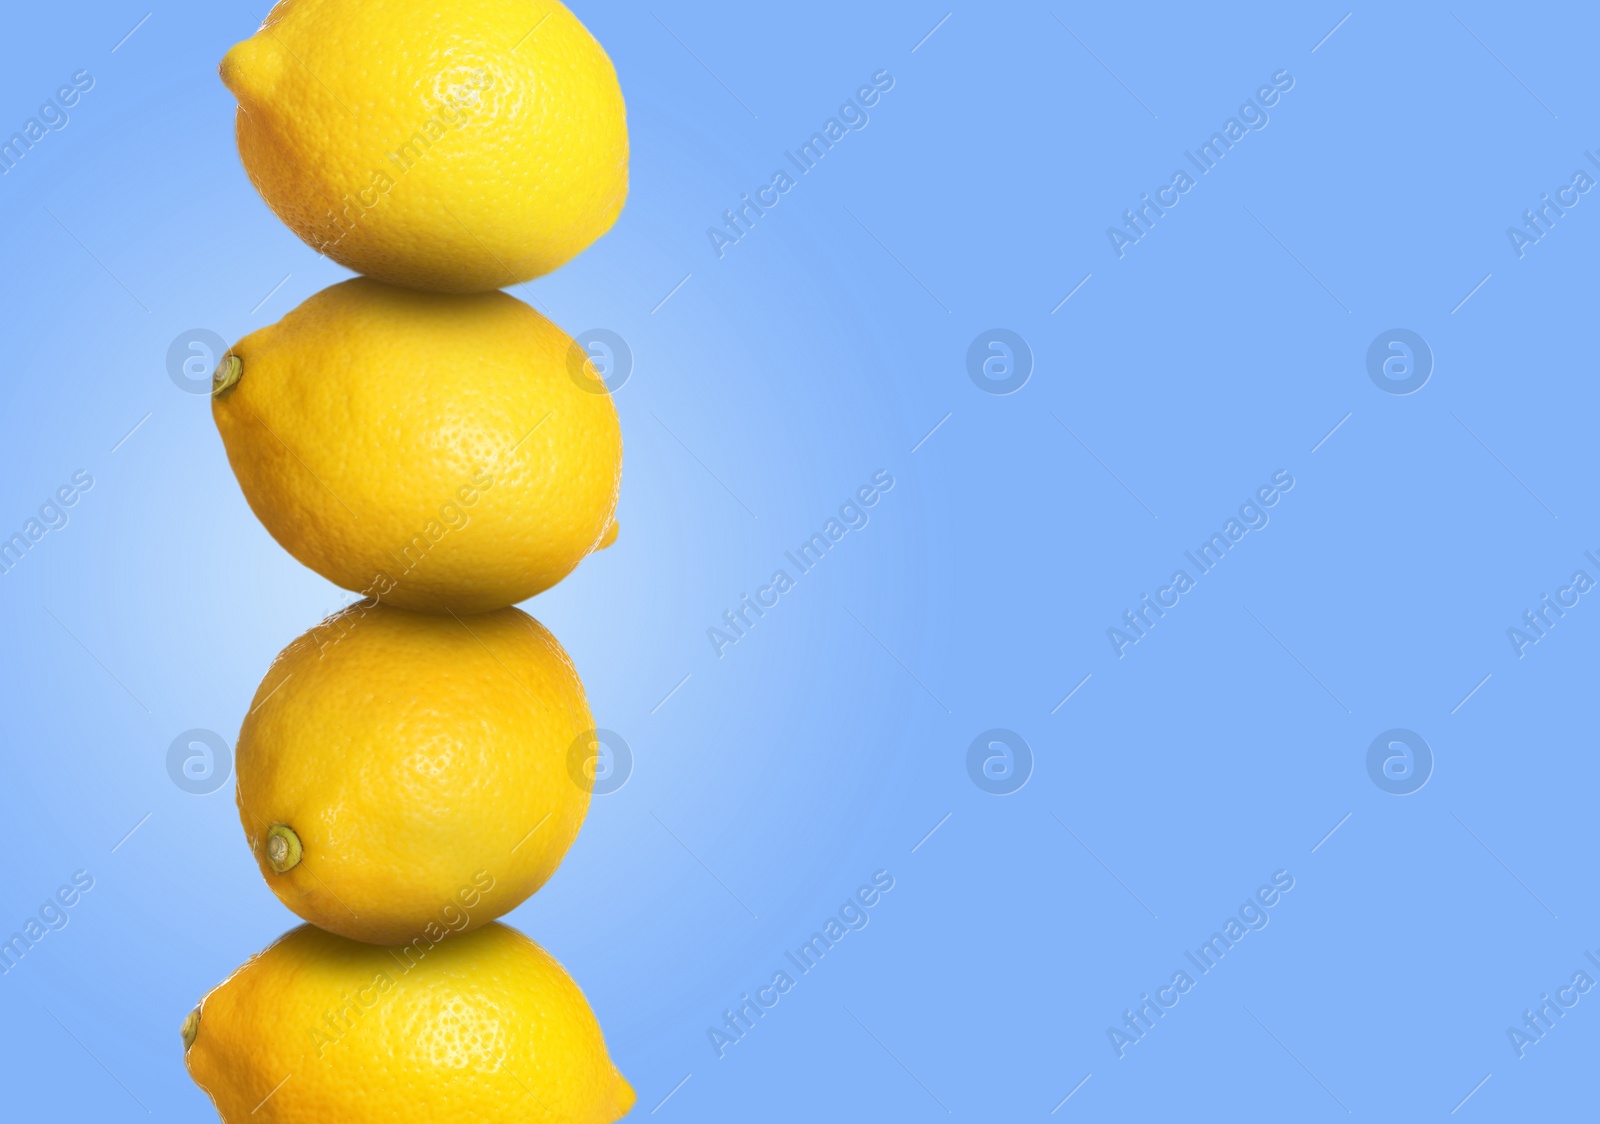 Image of Stack of whole fresh lemons on light blue background, space for text